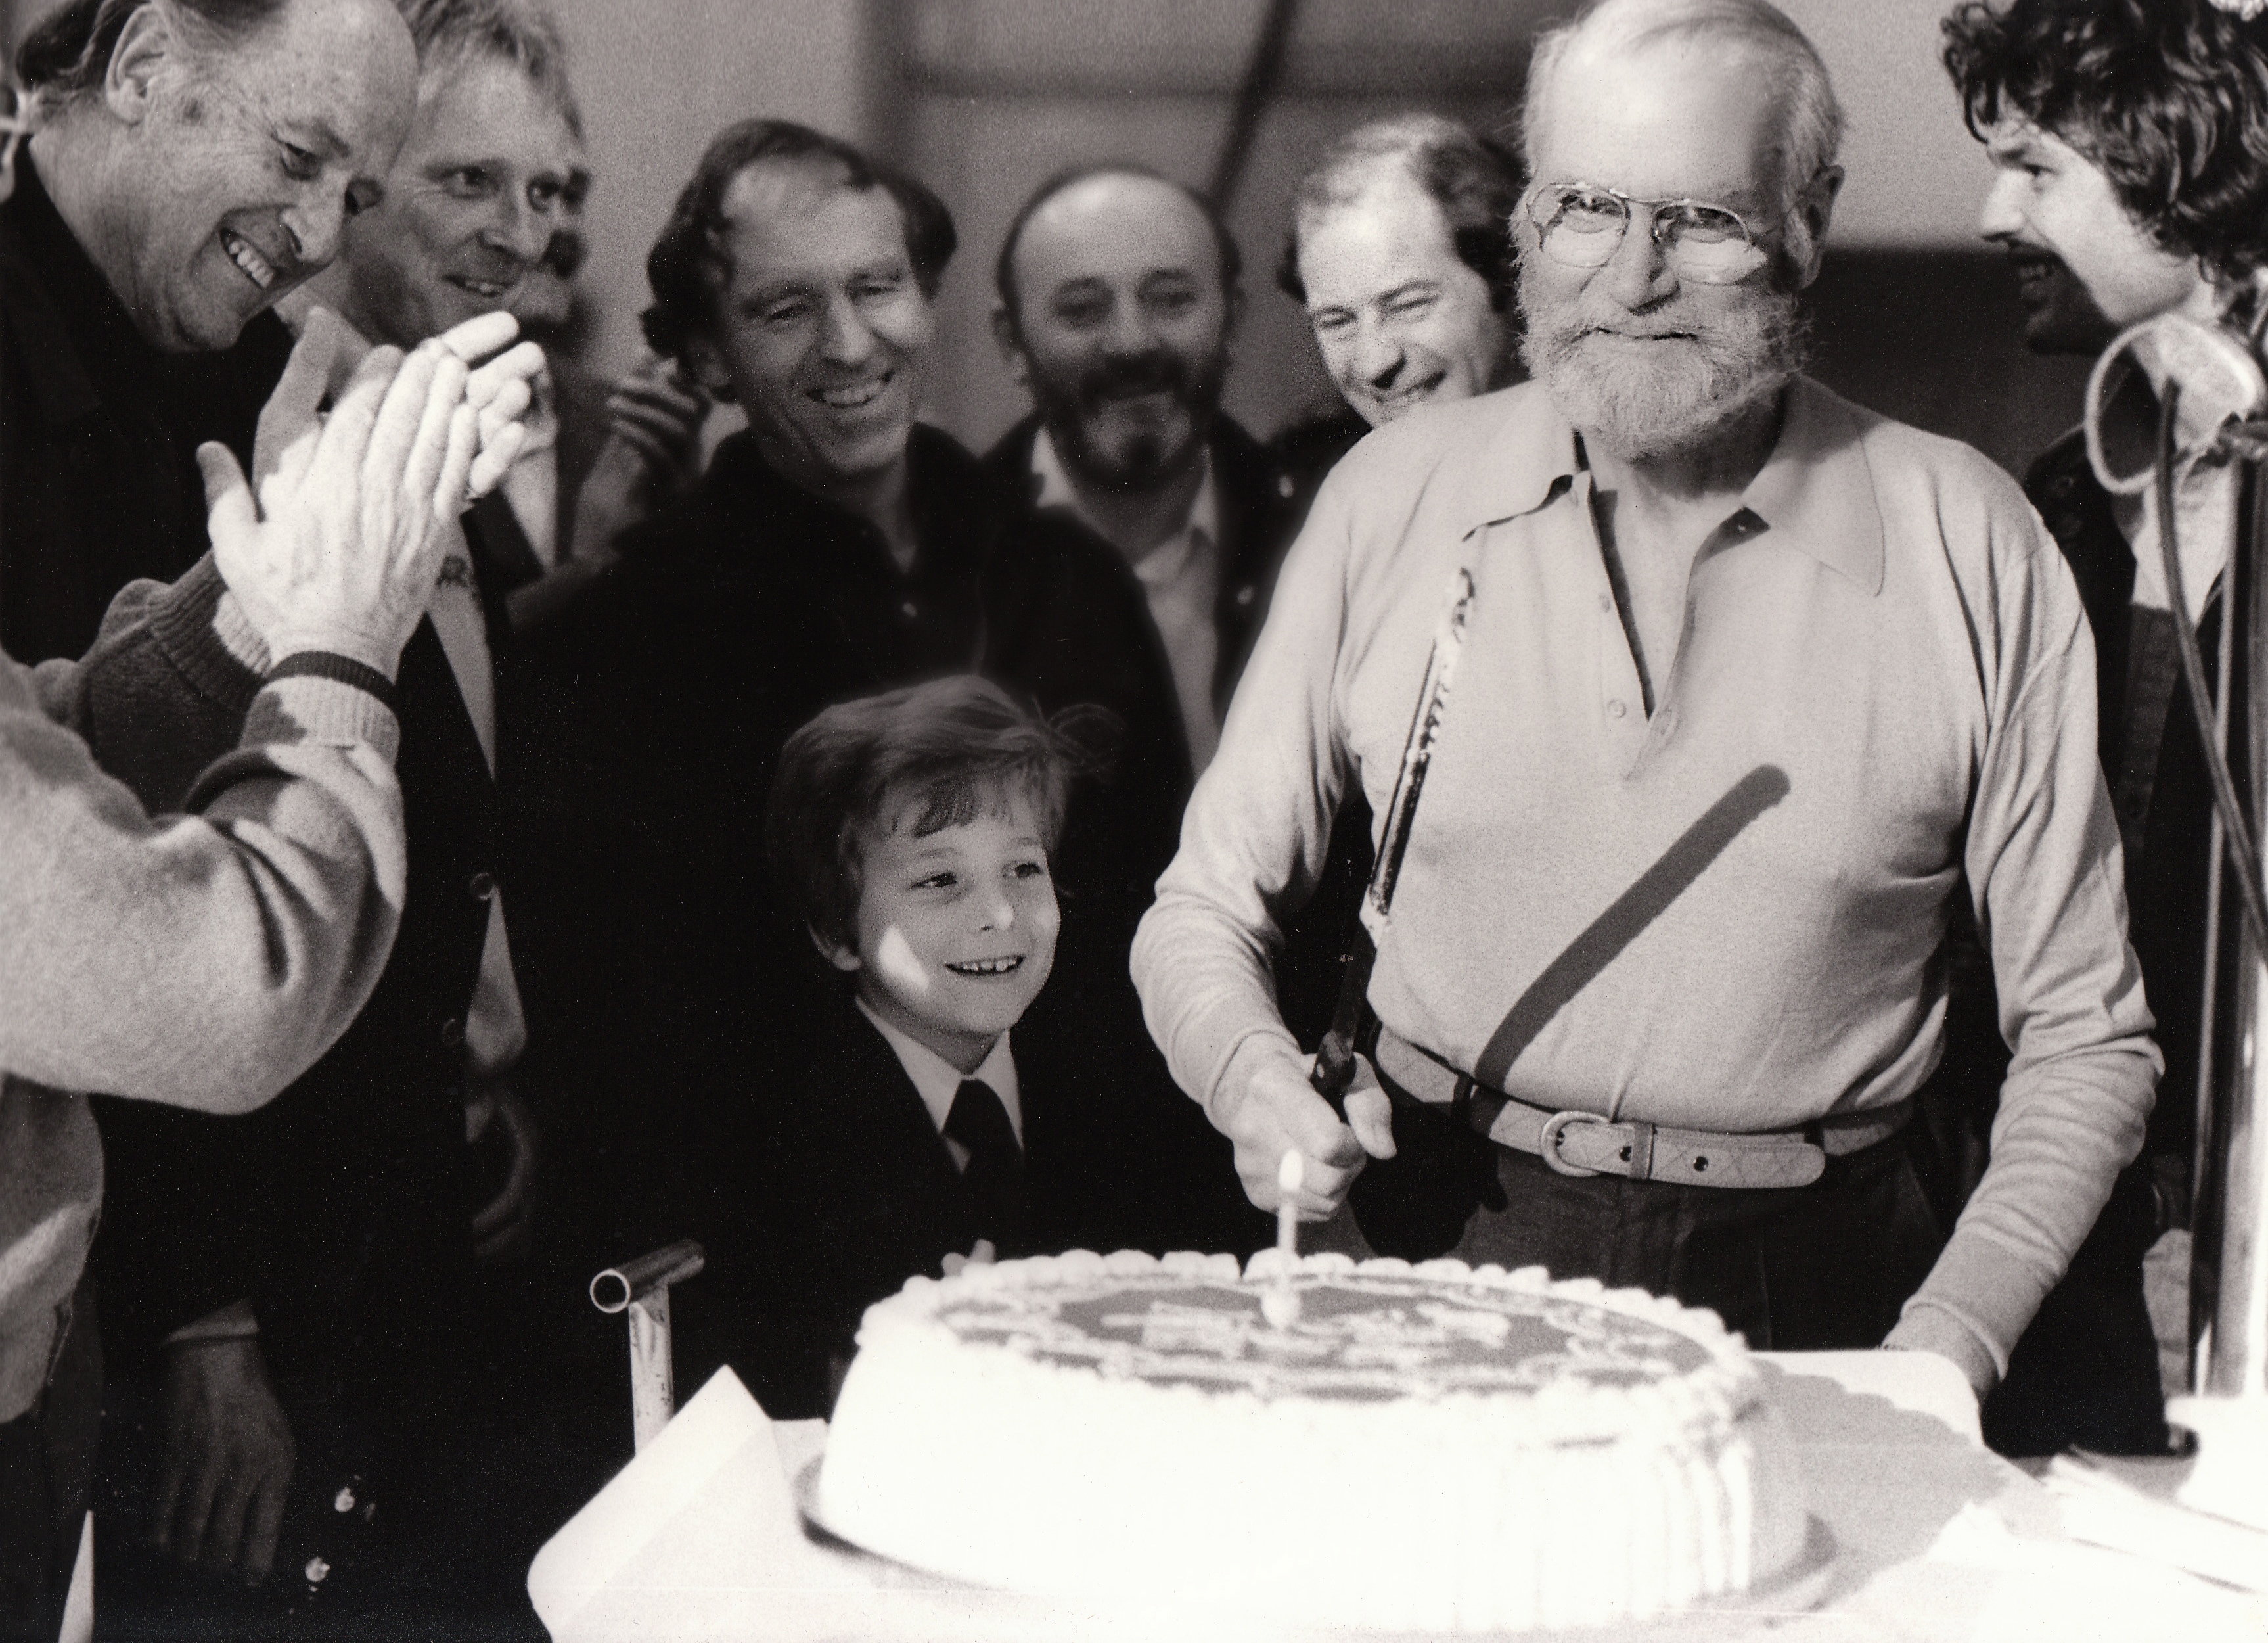 L to R Ray Harryhausen (Producer), Desmond Davis (Director), Jaxon Gwillm (Son of actor Jack Gwillim who played Poseidon), Sir Laurence Olivier (Zeus) and Harry Hamlin (Perseus) . Cast and crew celebrate Laurence Olivier's 72nd birthday on the set.